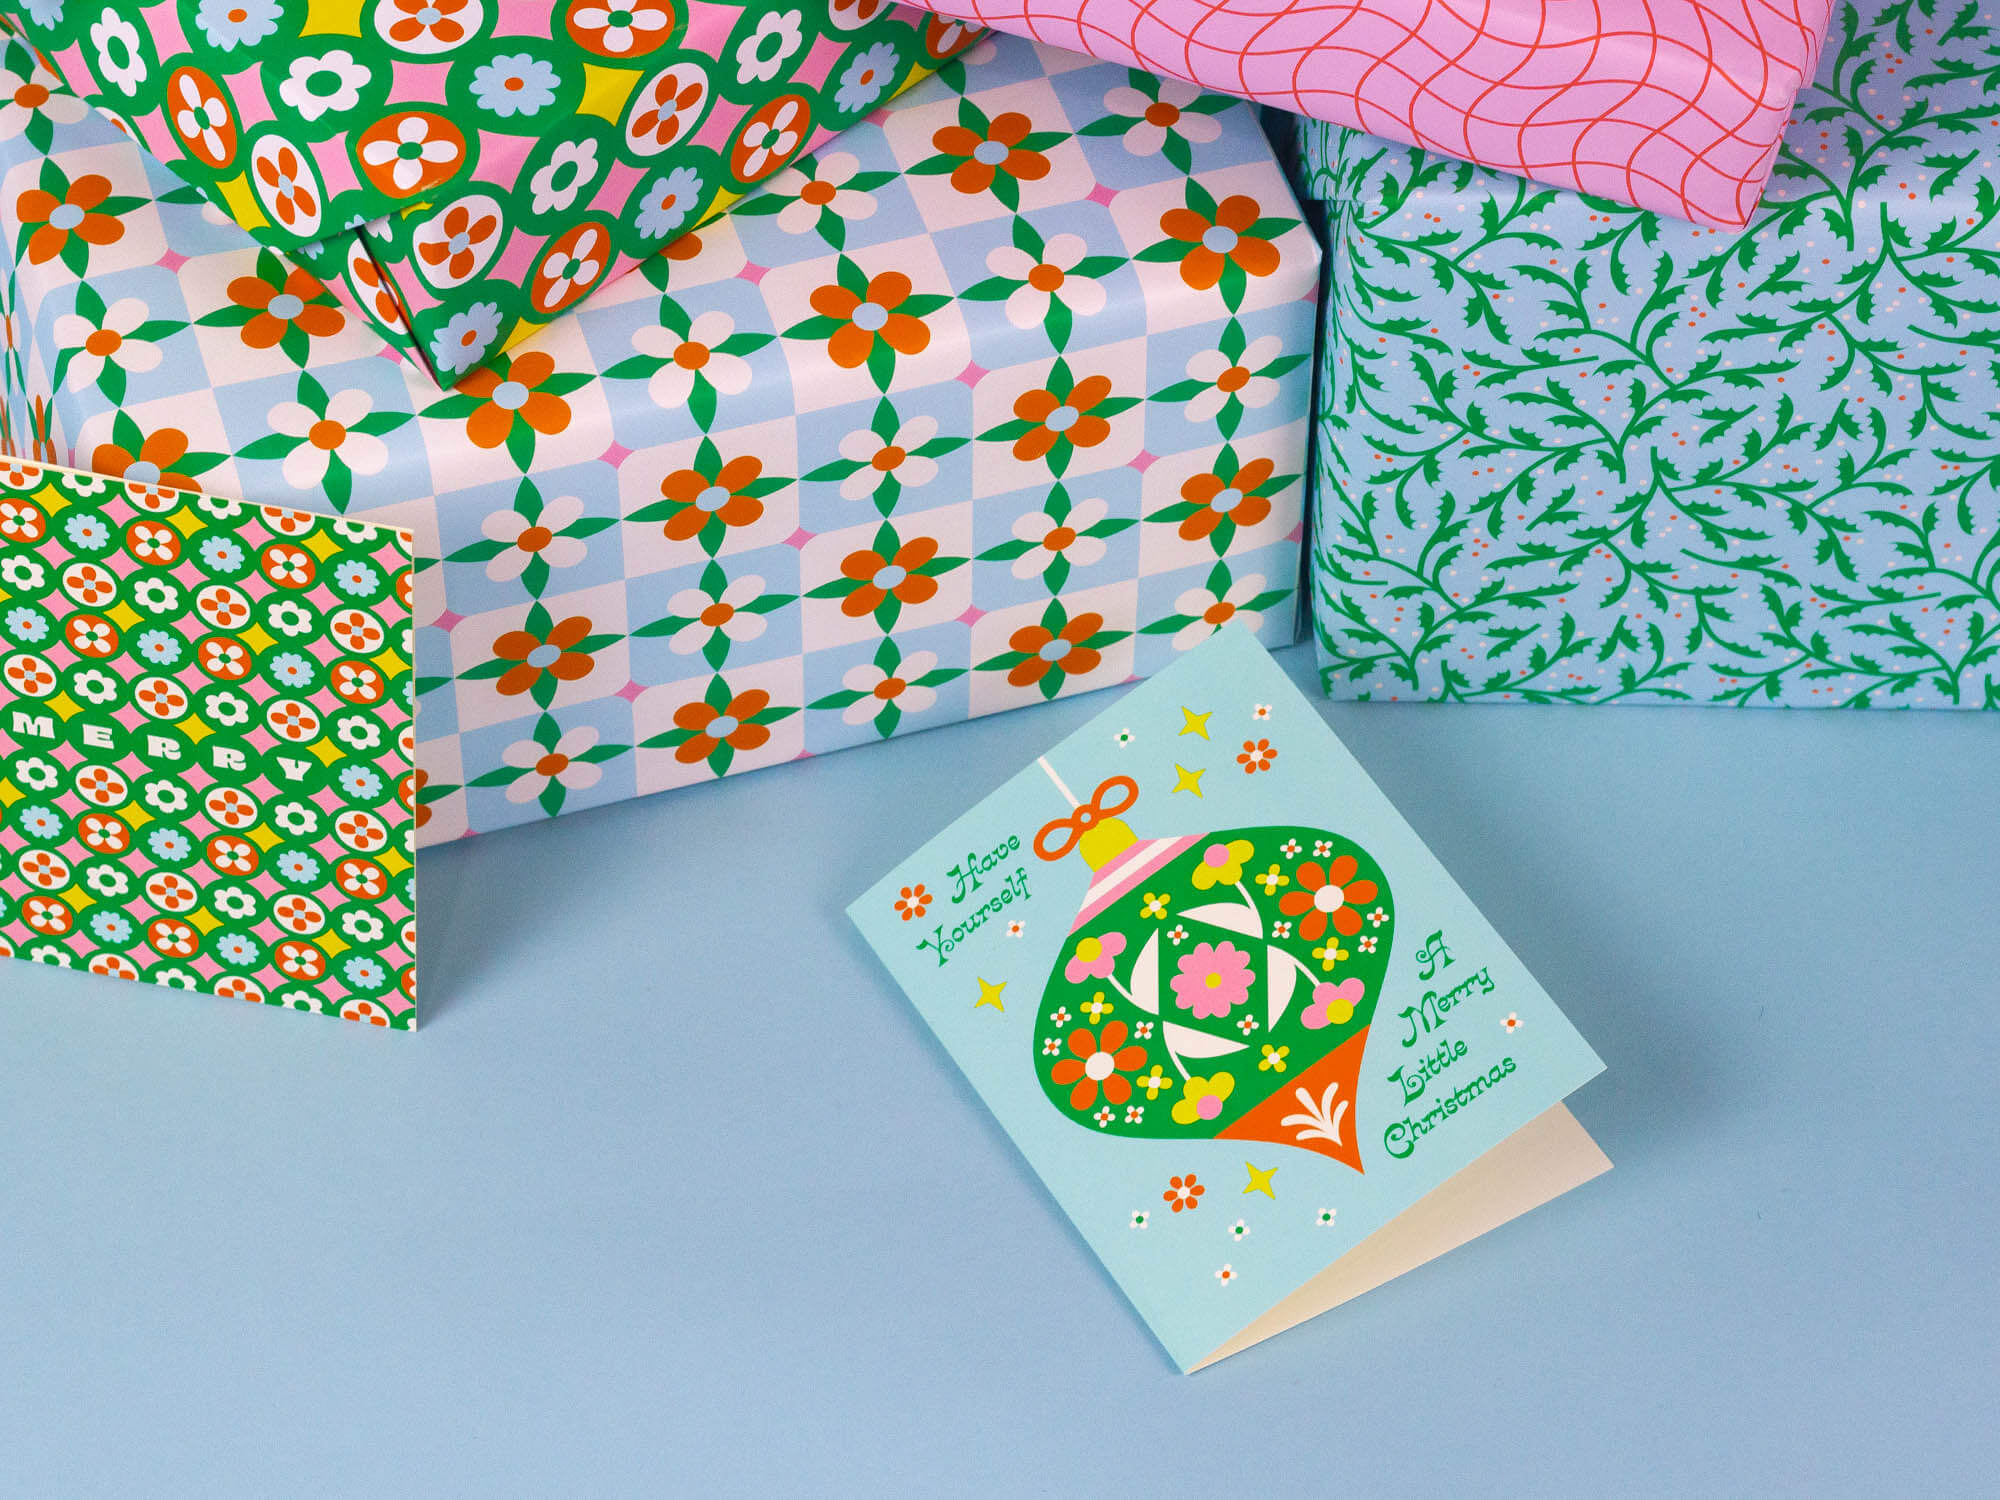 Have Yourself a Merry Little Christmas open holiday card and close up of retro floral Christmas wrapping paper.